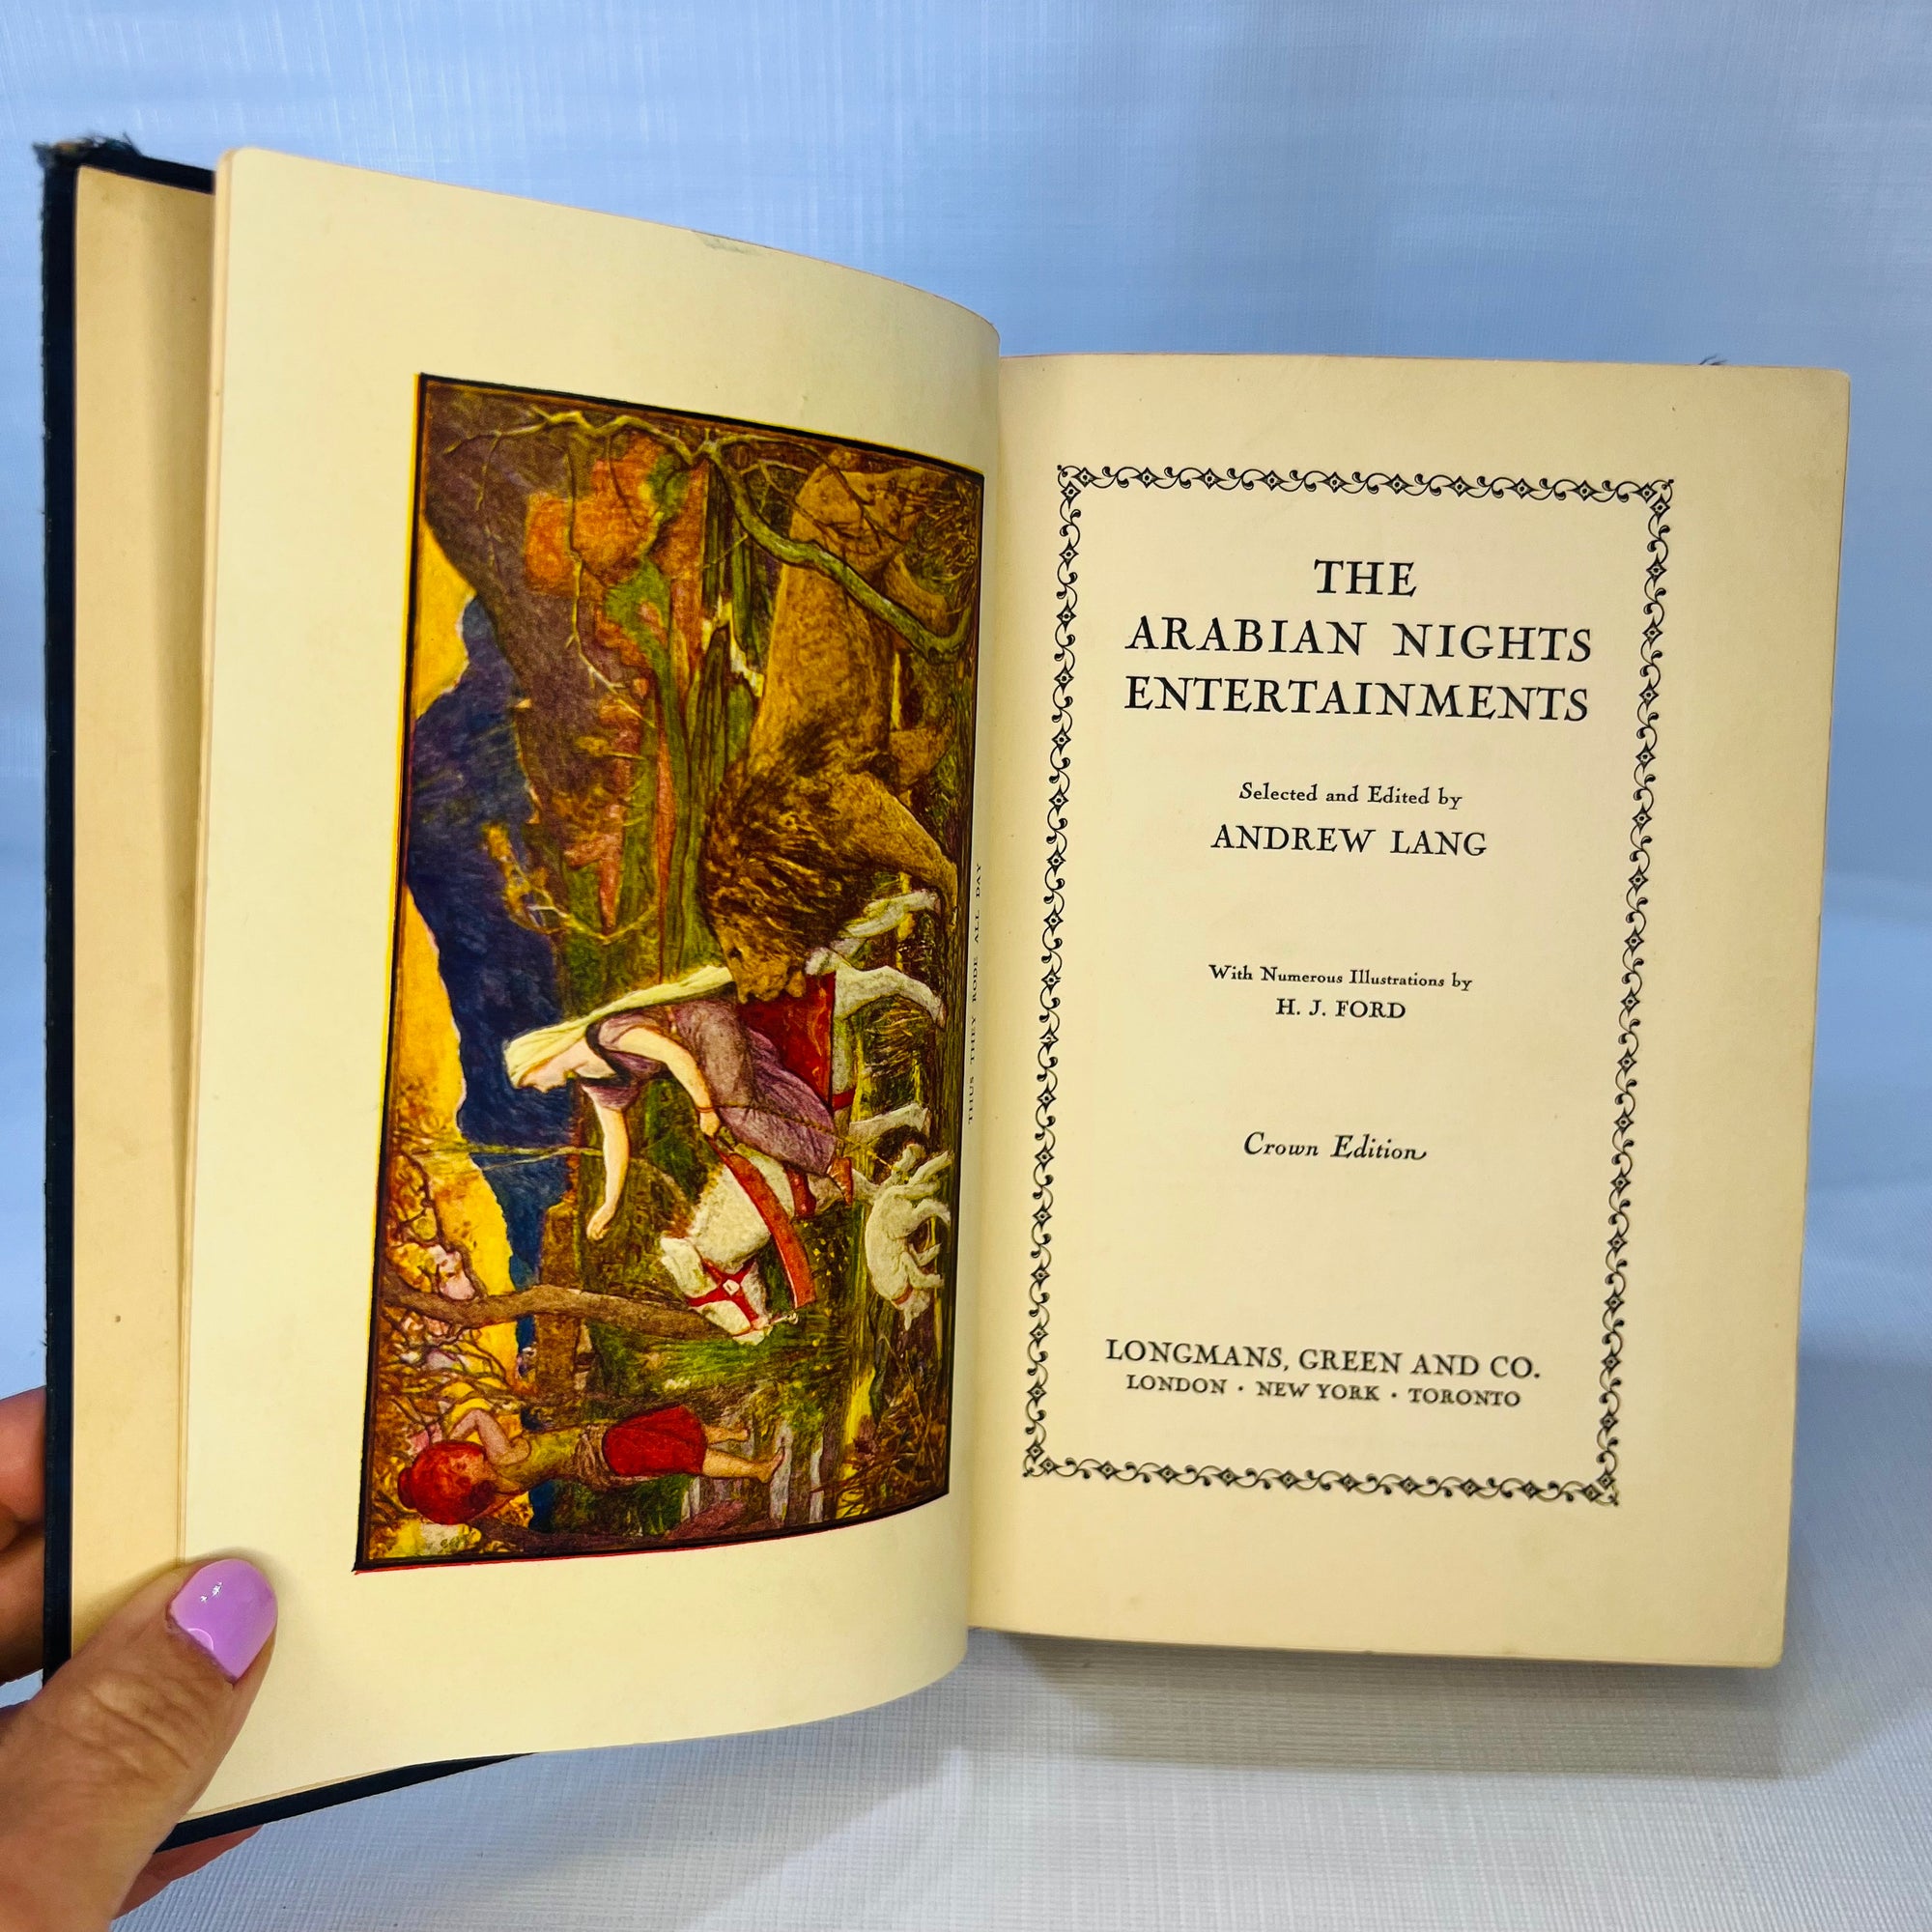 The Arabian Nights Entertainments selected and edited by Andrew Lang illustrations by H.J. Ford 1930 Crown Edition Longmans Green and Co